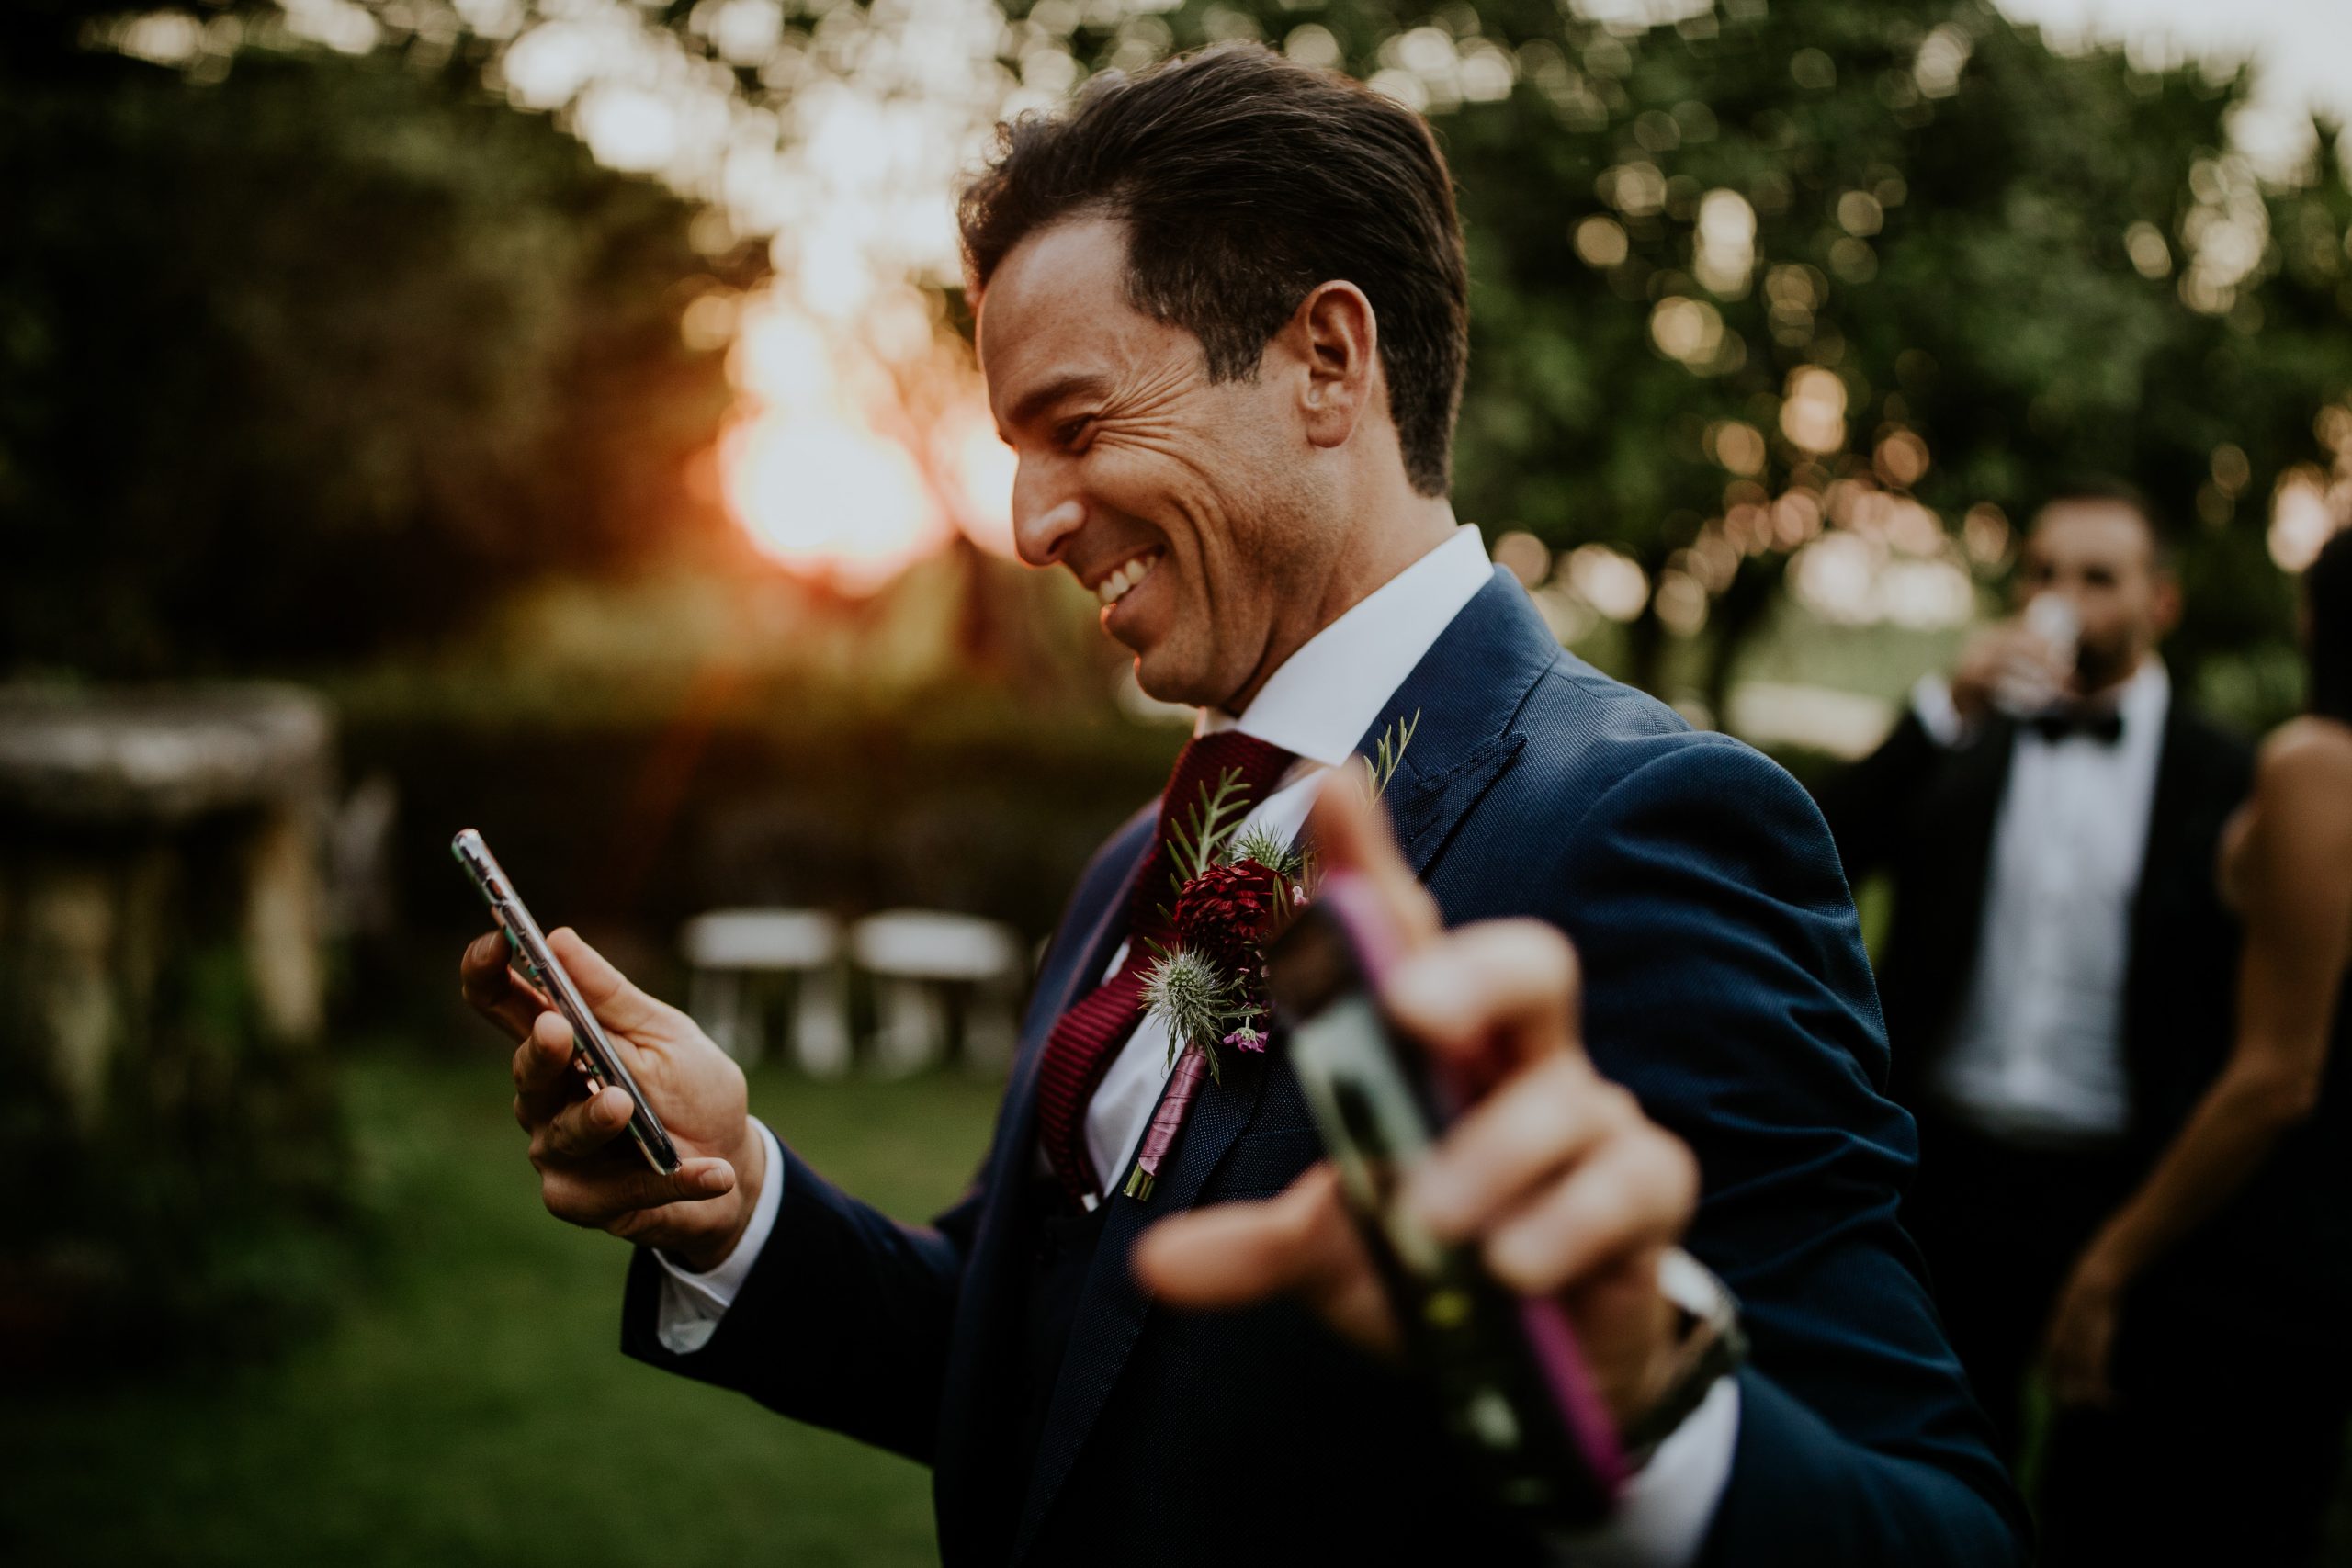 wedding guest smiling and looking at the mobile